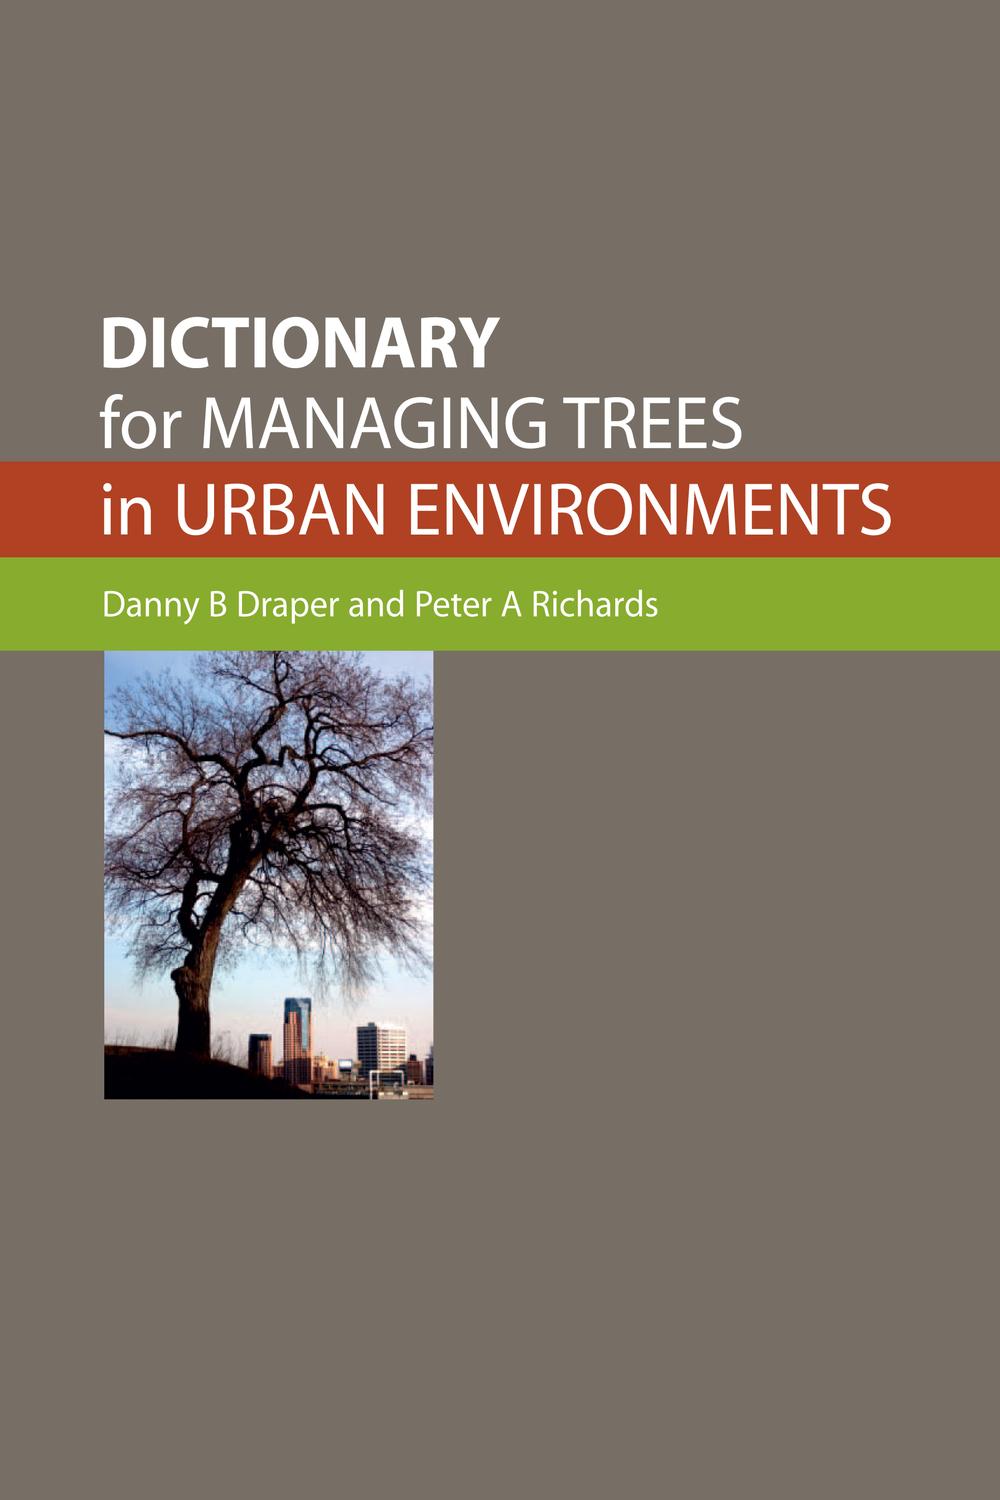 Dictionary for Managing Trees in Urban Environments - Danny B Draper, Peter A Richards